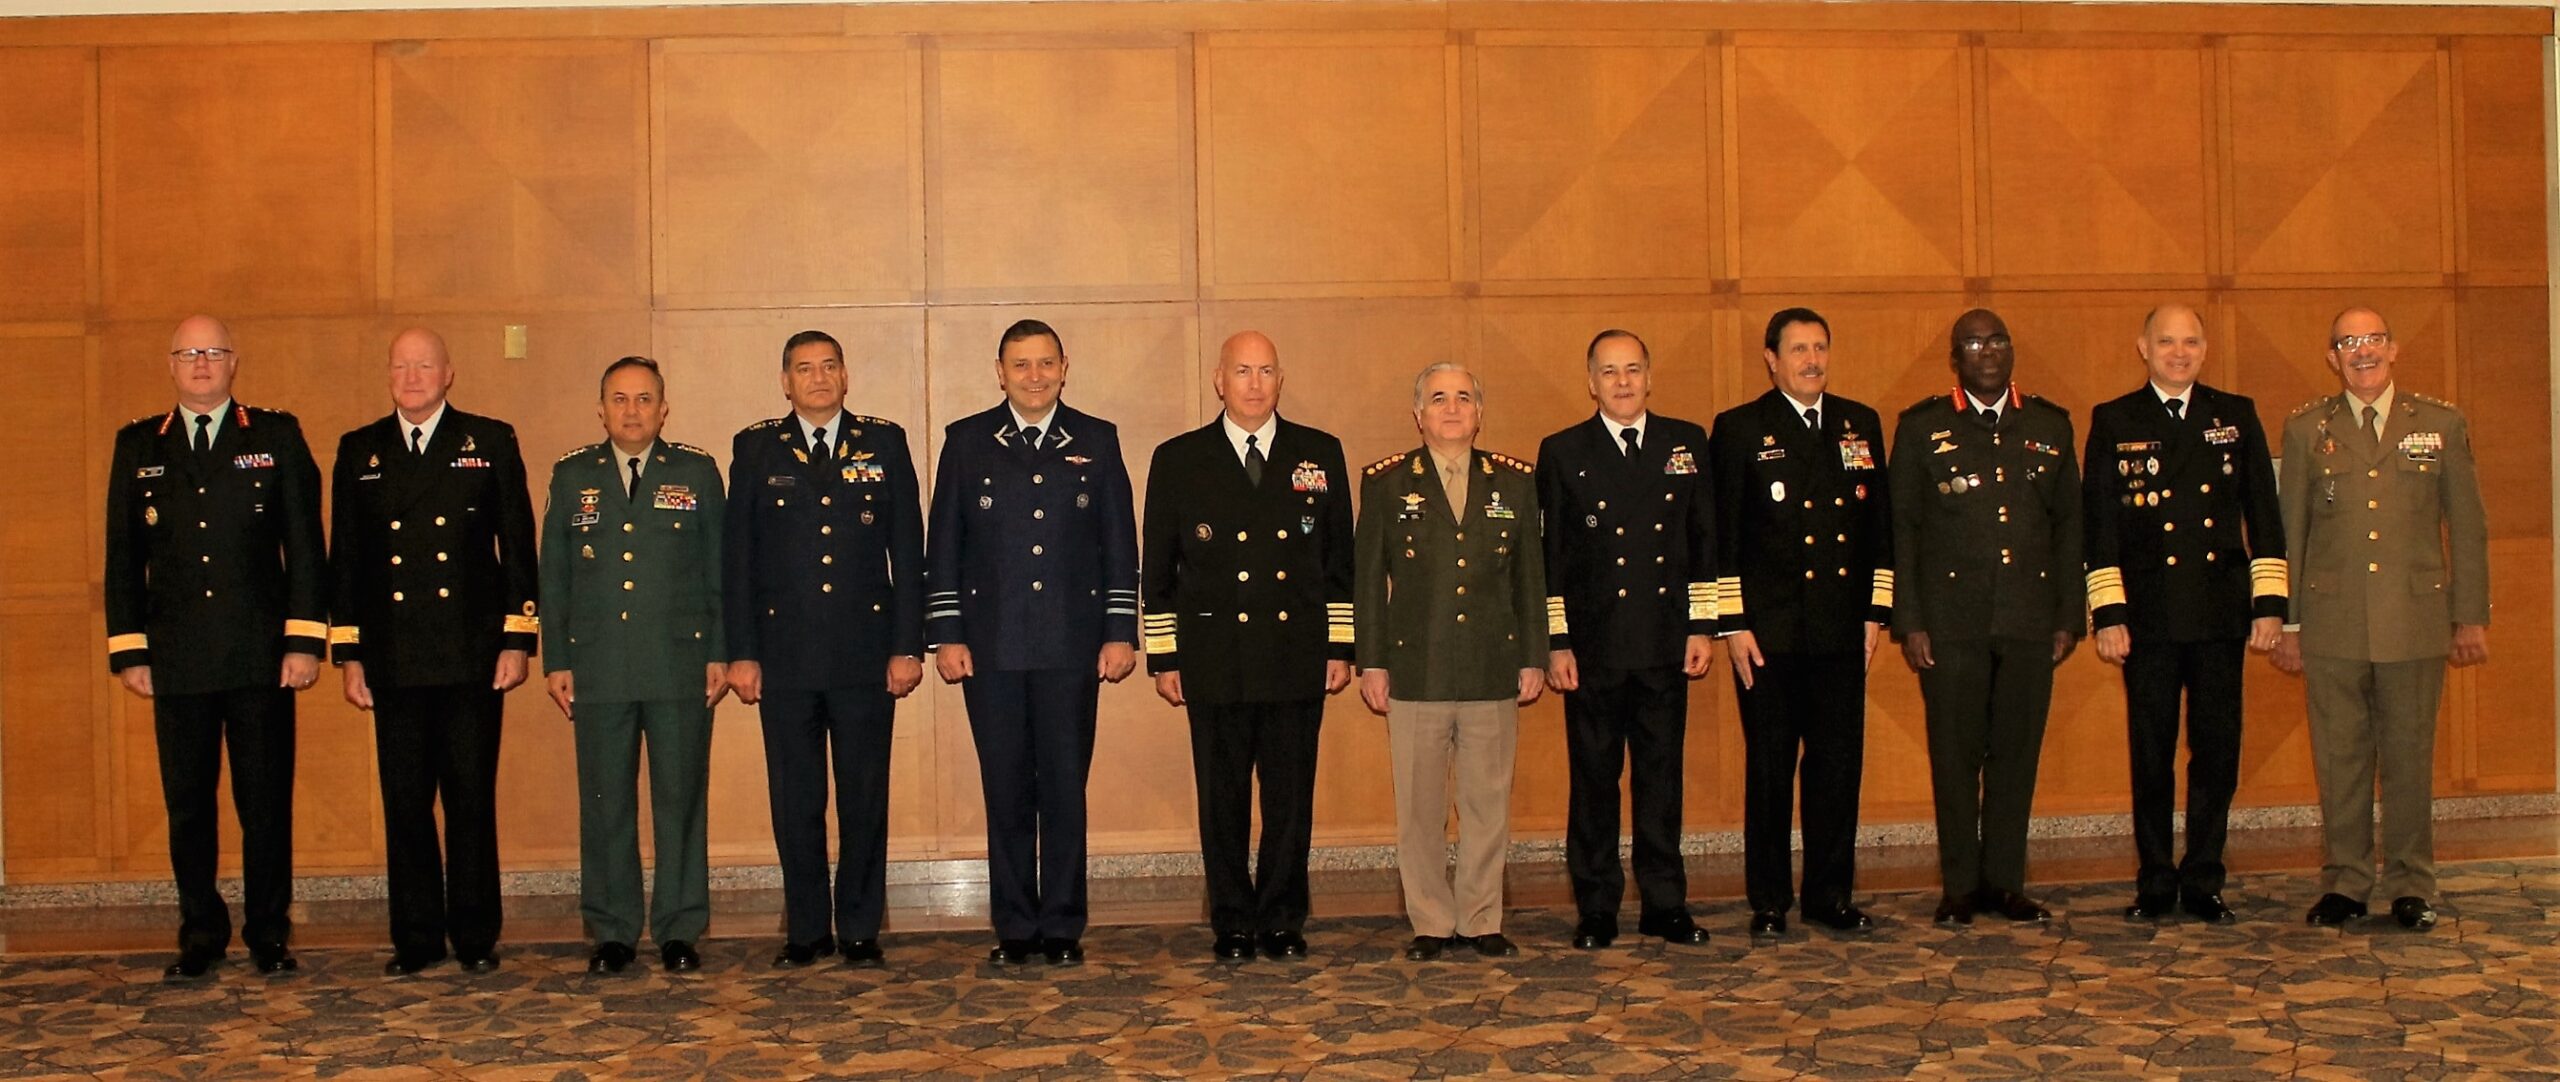 Argentina Hosts 2018 South American Defense Conference